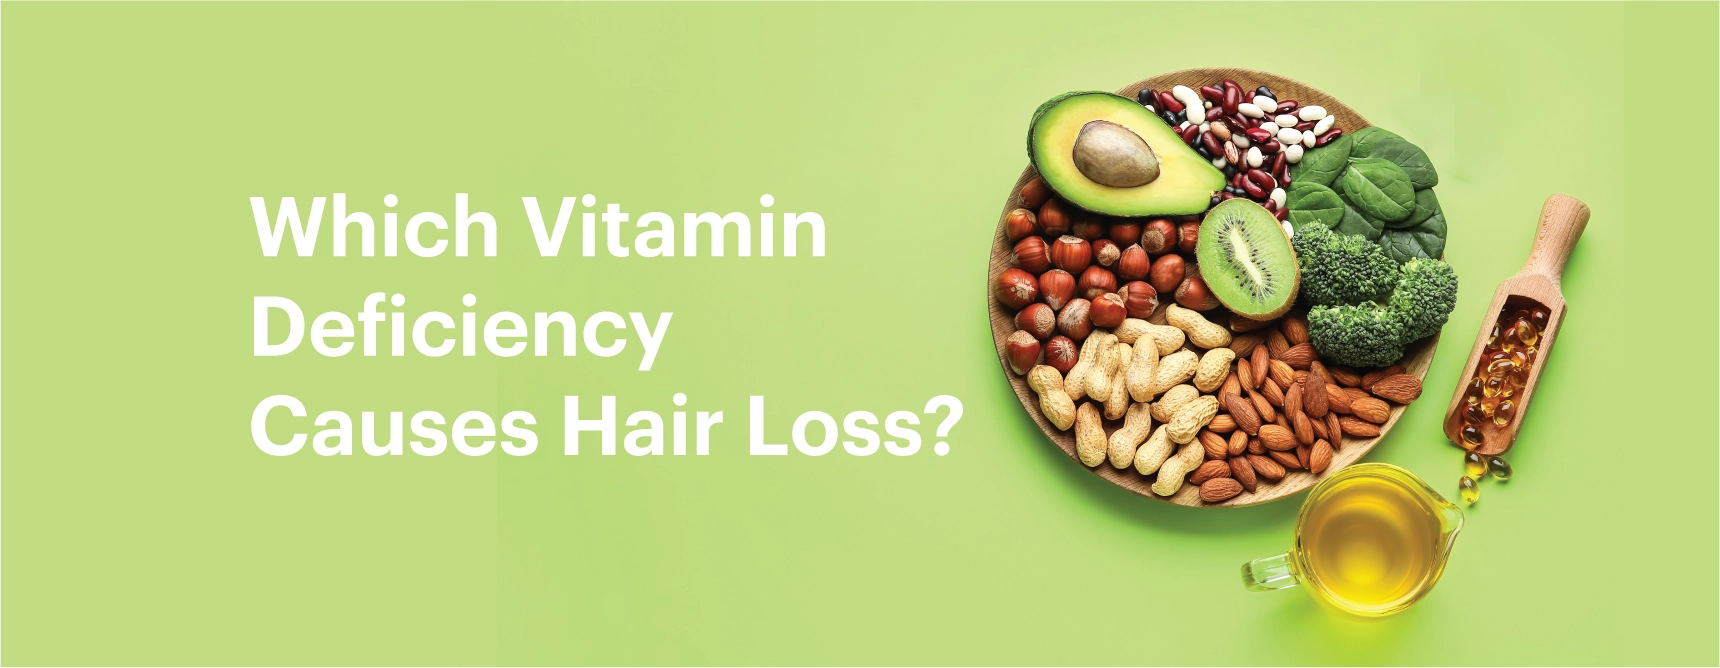 Can Improving My Diet Prevent Hair Loss